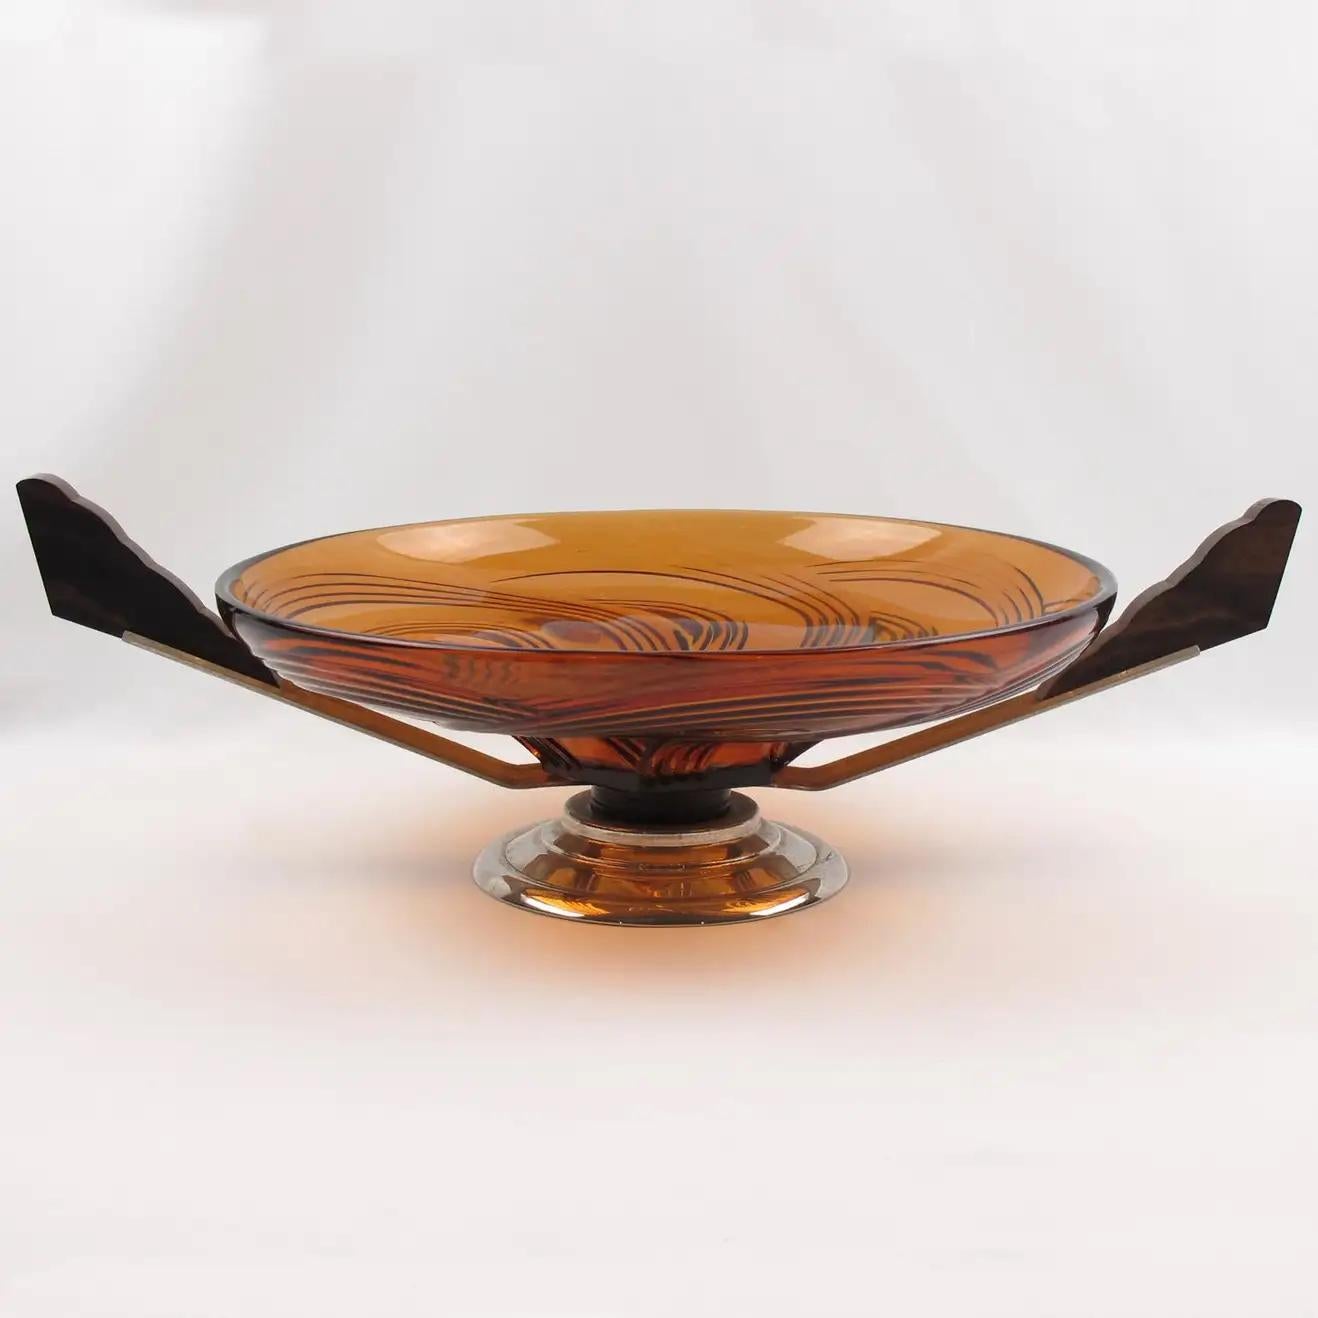 This stylish French Art Deco modernist centerpiece or bowl features a large round molded glass bowl with a swirled pattern in a lovely transparent burnt orange tone. The pedestal base is in chromed metal and Macassar wood. The centerpiece is adorned